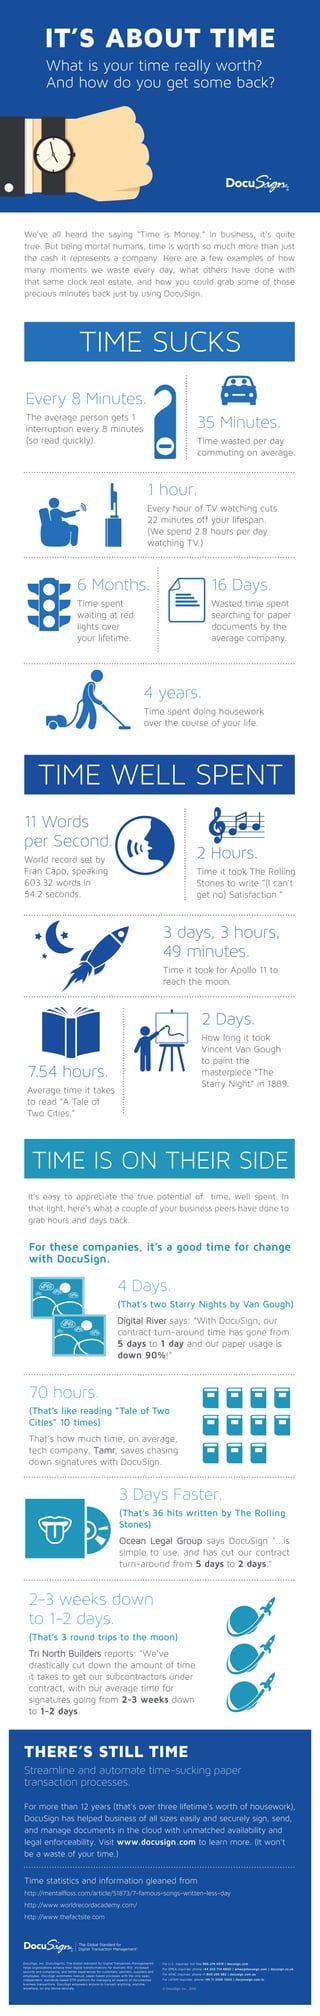 IT’S ABOUT TIME
What is your time really worth?
And how do you get some back?
Every 8 Minutes.
The average person gets 1
interruption every 8 minutes
(so read quickly).
35 Minutes.
Time wasted per day
commuting on average.
© DocuSign, Inc., 2015
For U.S. inquiries: toll free 866.219.4318 | docusign.com
For EMEA inquiries: phone +44 203 714 4800 | emea@docusign.com | docusign.co.uk
For APAC inquiries: phone +1 800 255 982 | docusign.com.au
For LATAM inquiries: phone +55 11 3330 1000 | docyousign.com.br
DocuSign, Inc. (DocuSign®), The Global Standard for Digital Transaction Management®
helps organizations achieve their digital transformations for dramatic ROI, increased
security and compliance, and better experiences for customers, partners, suppliers and
employees. DocuSign automates manual, paper-based processes with the only open,
independent, standards-based DTM platform for managing all aspects of documented
business transactions. DocuSign empowers anyone to transact anything, anytime,
anywhere, on any device securely.
We’ve all heard the saying “Time is Money.” In business, it’s quite
true. But being mortal humans, time is worth so much more than just
the cash it represents a company. Here are a few examples of how
many moments we waste every day, what others have done with
that same clock real estate, and how you could grab some of those
precious minutes back just by using DocuSign.
TIME SUCKS
TIME WELL SPENT
4 years.
Time spent doing housework
over the course of your life.
16 Days.
Wasted time spent
searching for paper
documents by the
average company.
6 Months.
Time spent
waiting at red
lights over
your lifetime.
11 Words
per Second.
World record set by
Fran Capo, speaking
603.32 words in
54.2 seconds.
7.54 hours.
Average time it takes
to read "A Tale of
Two Cities."
2 Hours.
Time it took The Rolling
Stones to write “(I can’t
get no) Satisfaction.”
3 days, 3 hours,
49 minutes.
Time it took for Apollo 11 to
reach the moon.
TIME IS ON THEIR SIDE
2-3 weeks down
to 1-2 days.
(That’s 3 round trips to the moon)
Tri North Builders reports: "We've
drastically cut down the amount of time
it takes to get our subcontractors under
contract, with our average time for
signatures going from 2-3 weeks down
to 1-2 days.
It’s easy to appreciate the true potential of time, well spent. In
that light, here’s what a couple of your business peers have done to
grab hours and days back.
THERE’S STILL TIME
Streamline and automate time-sucking paper
transaction processes.
For more than 12 years (that's over three lifetime's worth of housework),
DocuSign has helped business of all sizes easily and securely sign, send,
and manage documents in the cloud with unmatched availability and
legal enforceability. Visit www.docusign.com to learn more. (It won't
be a waste of your time.)
Time statistics and information gleaned from
http://mentalfloss.com/article/51873/7-famous-songs-written-less-day
http://www.worldrecordacademy.com/
http://www.thefactsite.com
For these companies, it’s a good time for change
with DocuSign.
4 Days.
(That’s two Starry Nights by Van Gough)
Digital River says: "With DocuSign, our
contract turn-around time has gone from
5 days to 1 day and our paper usage is
down 90%!”
2 Days.
How long it took
Vincent Van Gough
to paint the
masterpiece “The
Starry Night” in 1889.
70 hours.
(That’s like reading “Tale of Two
Cities” 10 times)
That's how much time, on average,
tech company, Tamr, saves chasing
down signatures with DocuSign.
3 Days Faster.
(That’s 36 hits written by The Rolling
Stones)
Ocean Legal Group says DocuSign "...is
simple to use, and has cut our contract
turn-around from 5 days to 2 days."
1 hour.
Every hour of TV watching cuts
22 minutes off your lifespan.
(We spend 2.8 hours per day
watching TV.)
 